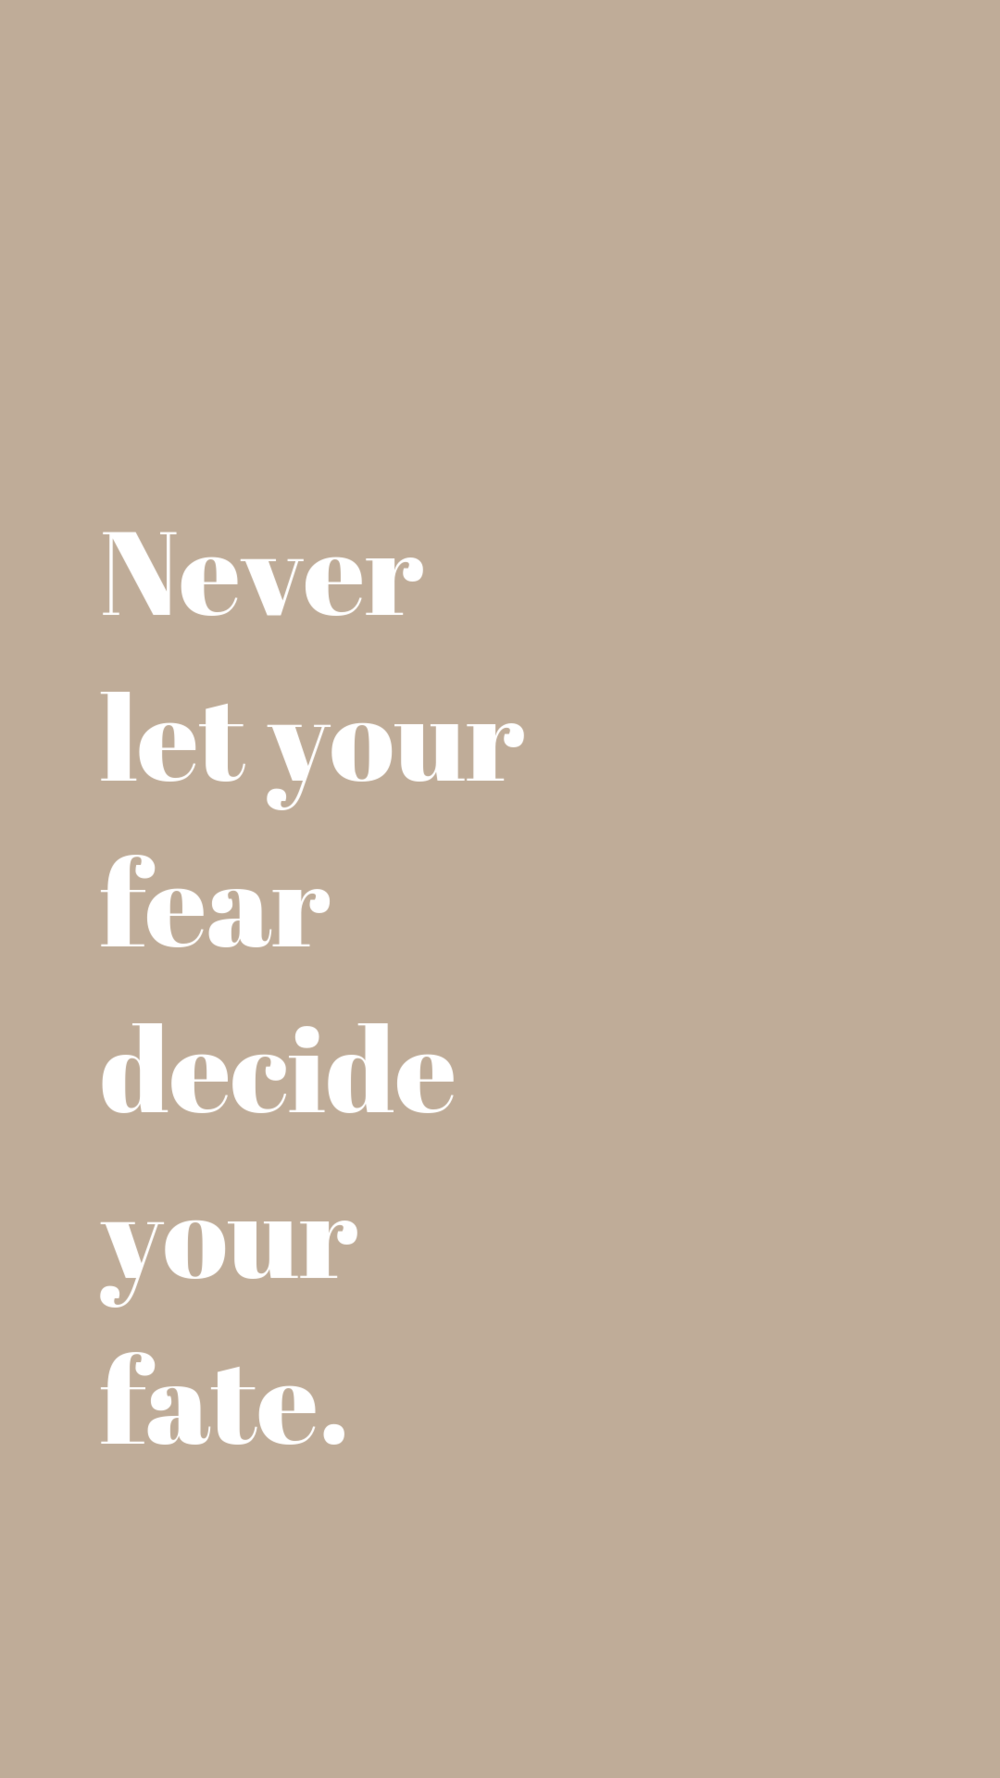 Never let your fear decide your fate | Empowering Quotes for Your Phone Screen Background | Miranda Schroeder Blog | www.mirandaschroeder.com